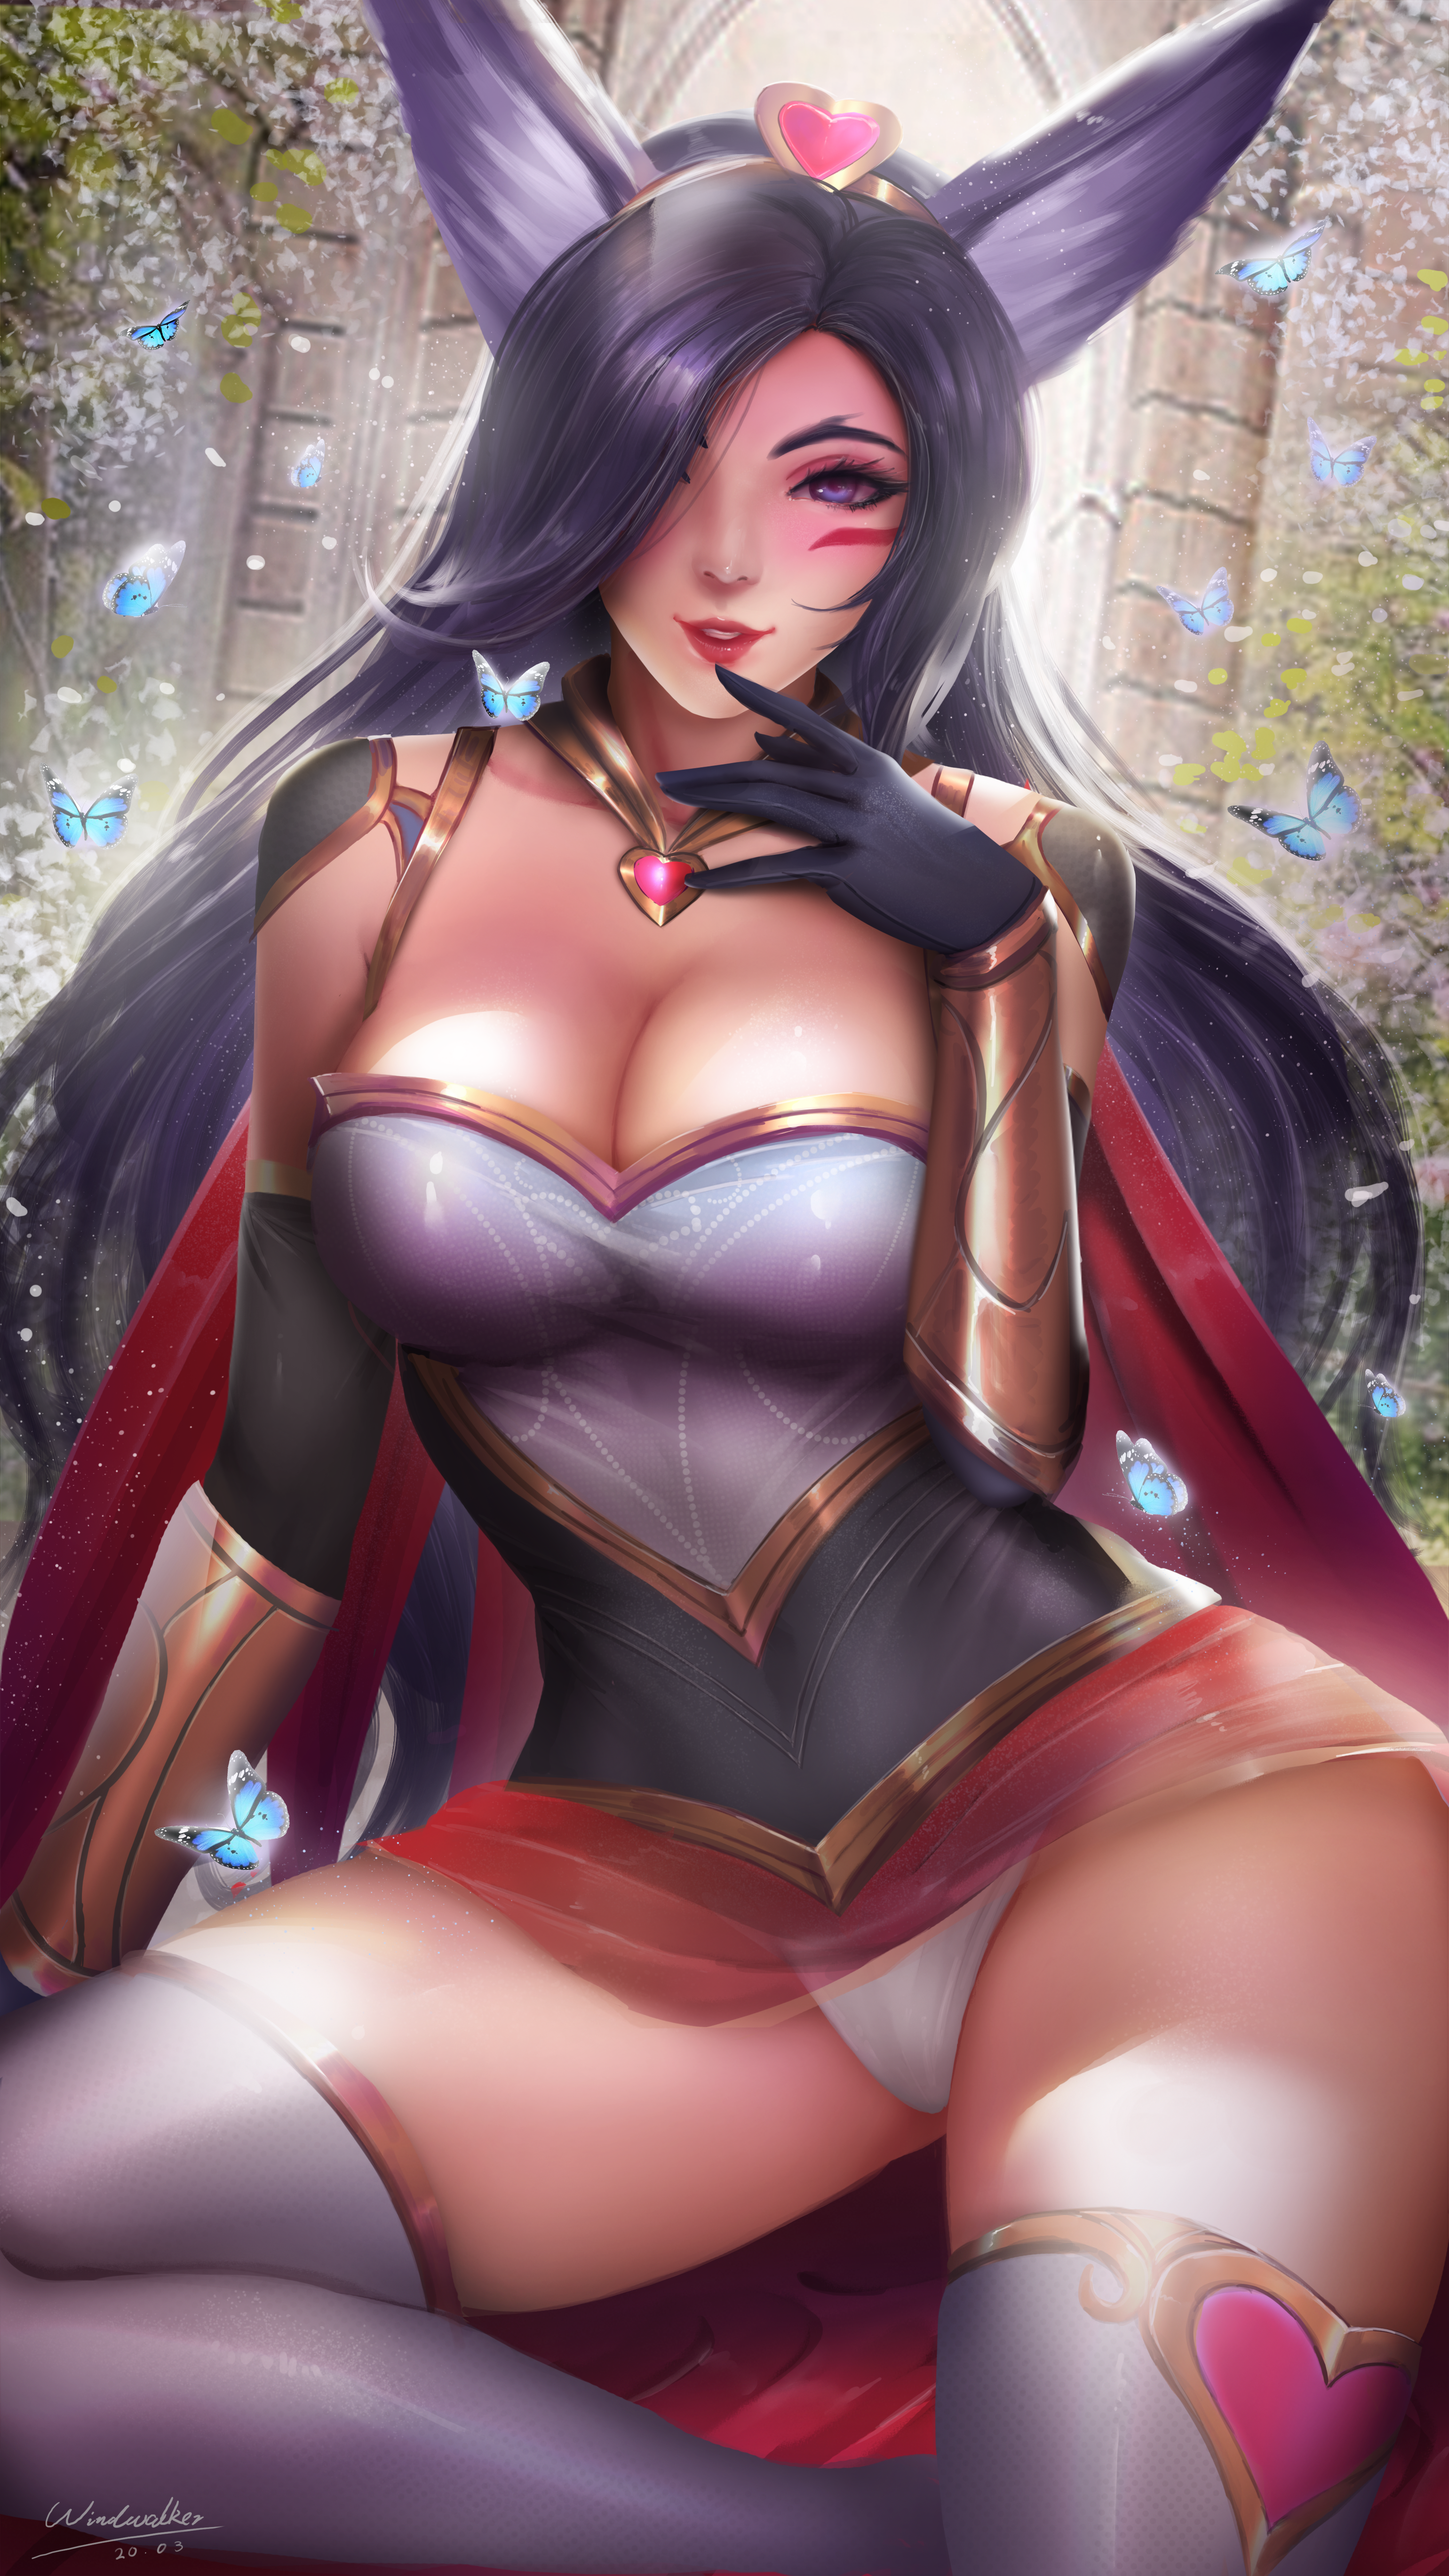 General 3080x5476 Xayah (League of Legends) League of Legends video games video game girls video game characters fantasy girl looking at viewer cleavage underwear panties thick thigh curvy 2D artwork drawing illustration fan art Windwalker Ture